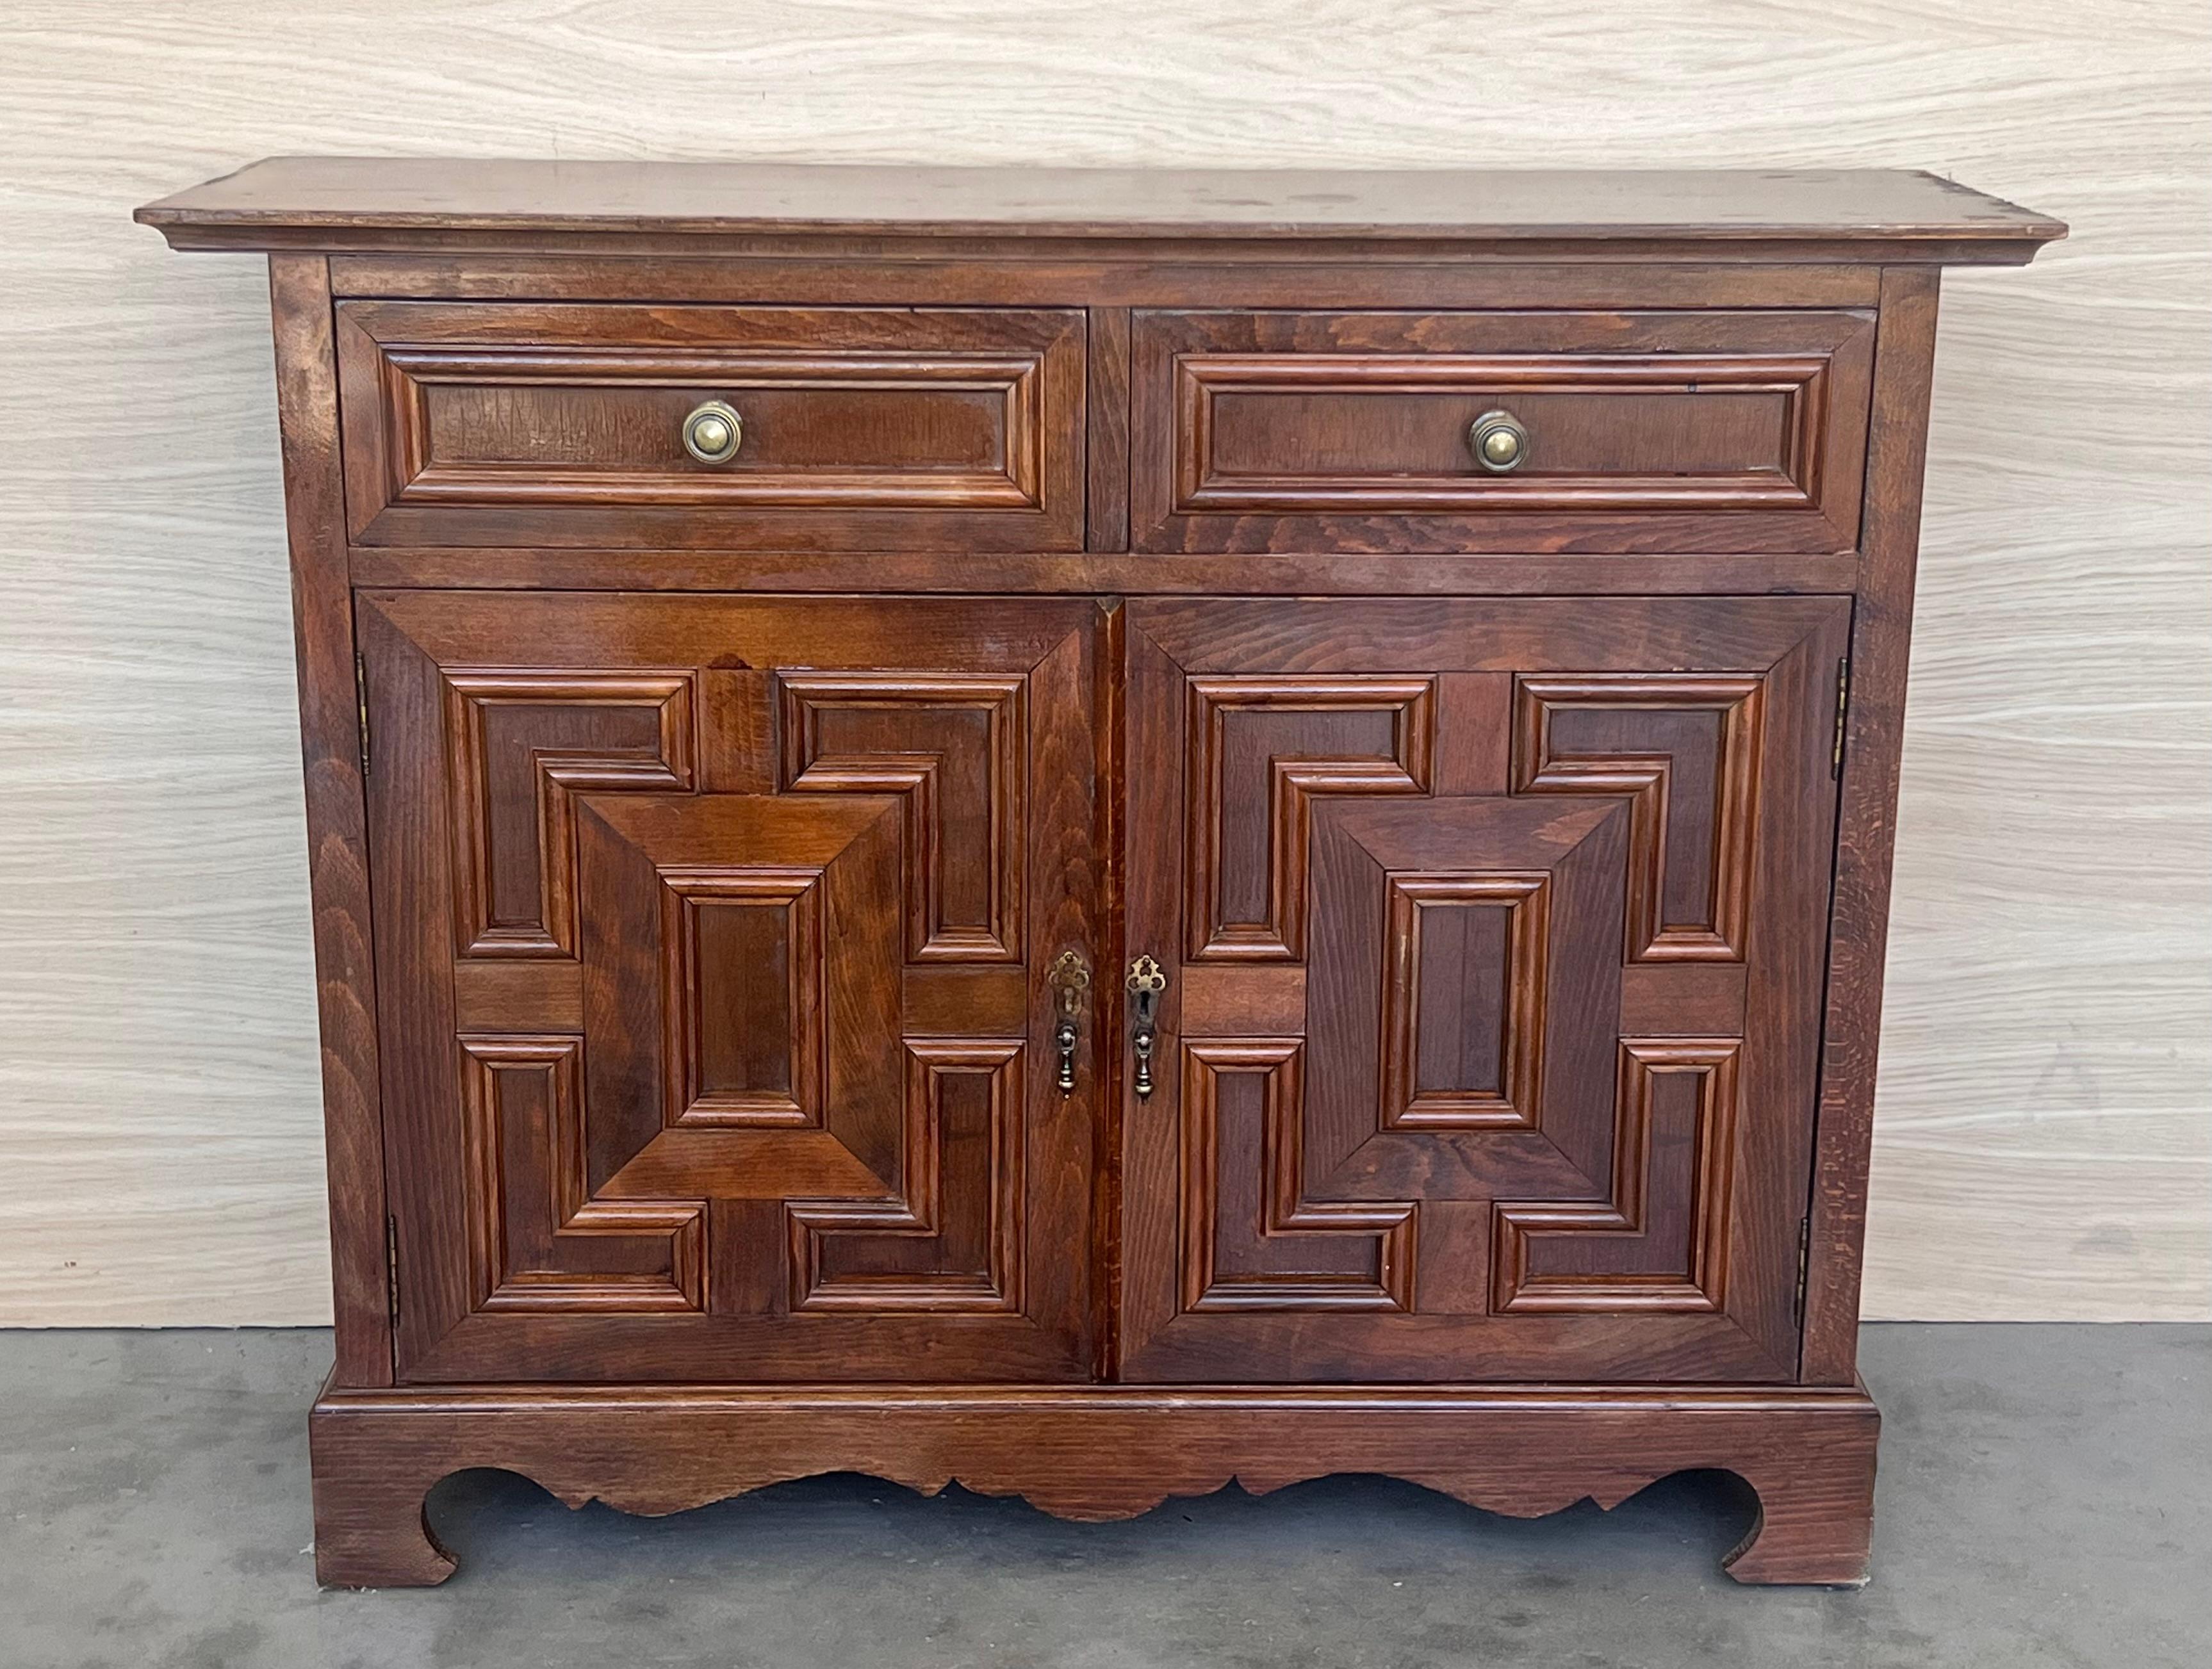 20th century Catalan Spanish carved walnut chest of drawers, highboy or console Country Provincial Chiffoniere was fashioned from solid walnut and features two drawers and two doors carved with charming detail and fitted with unusually intricate